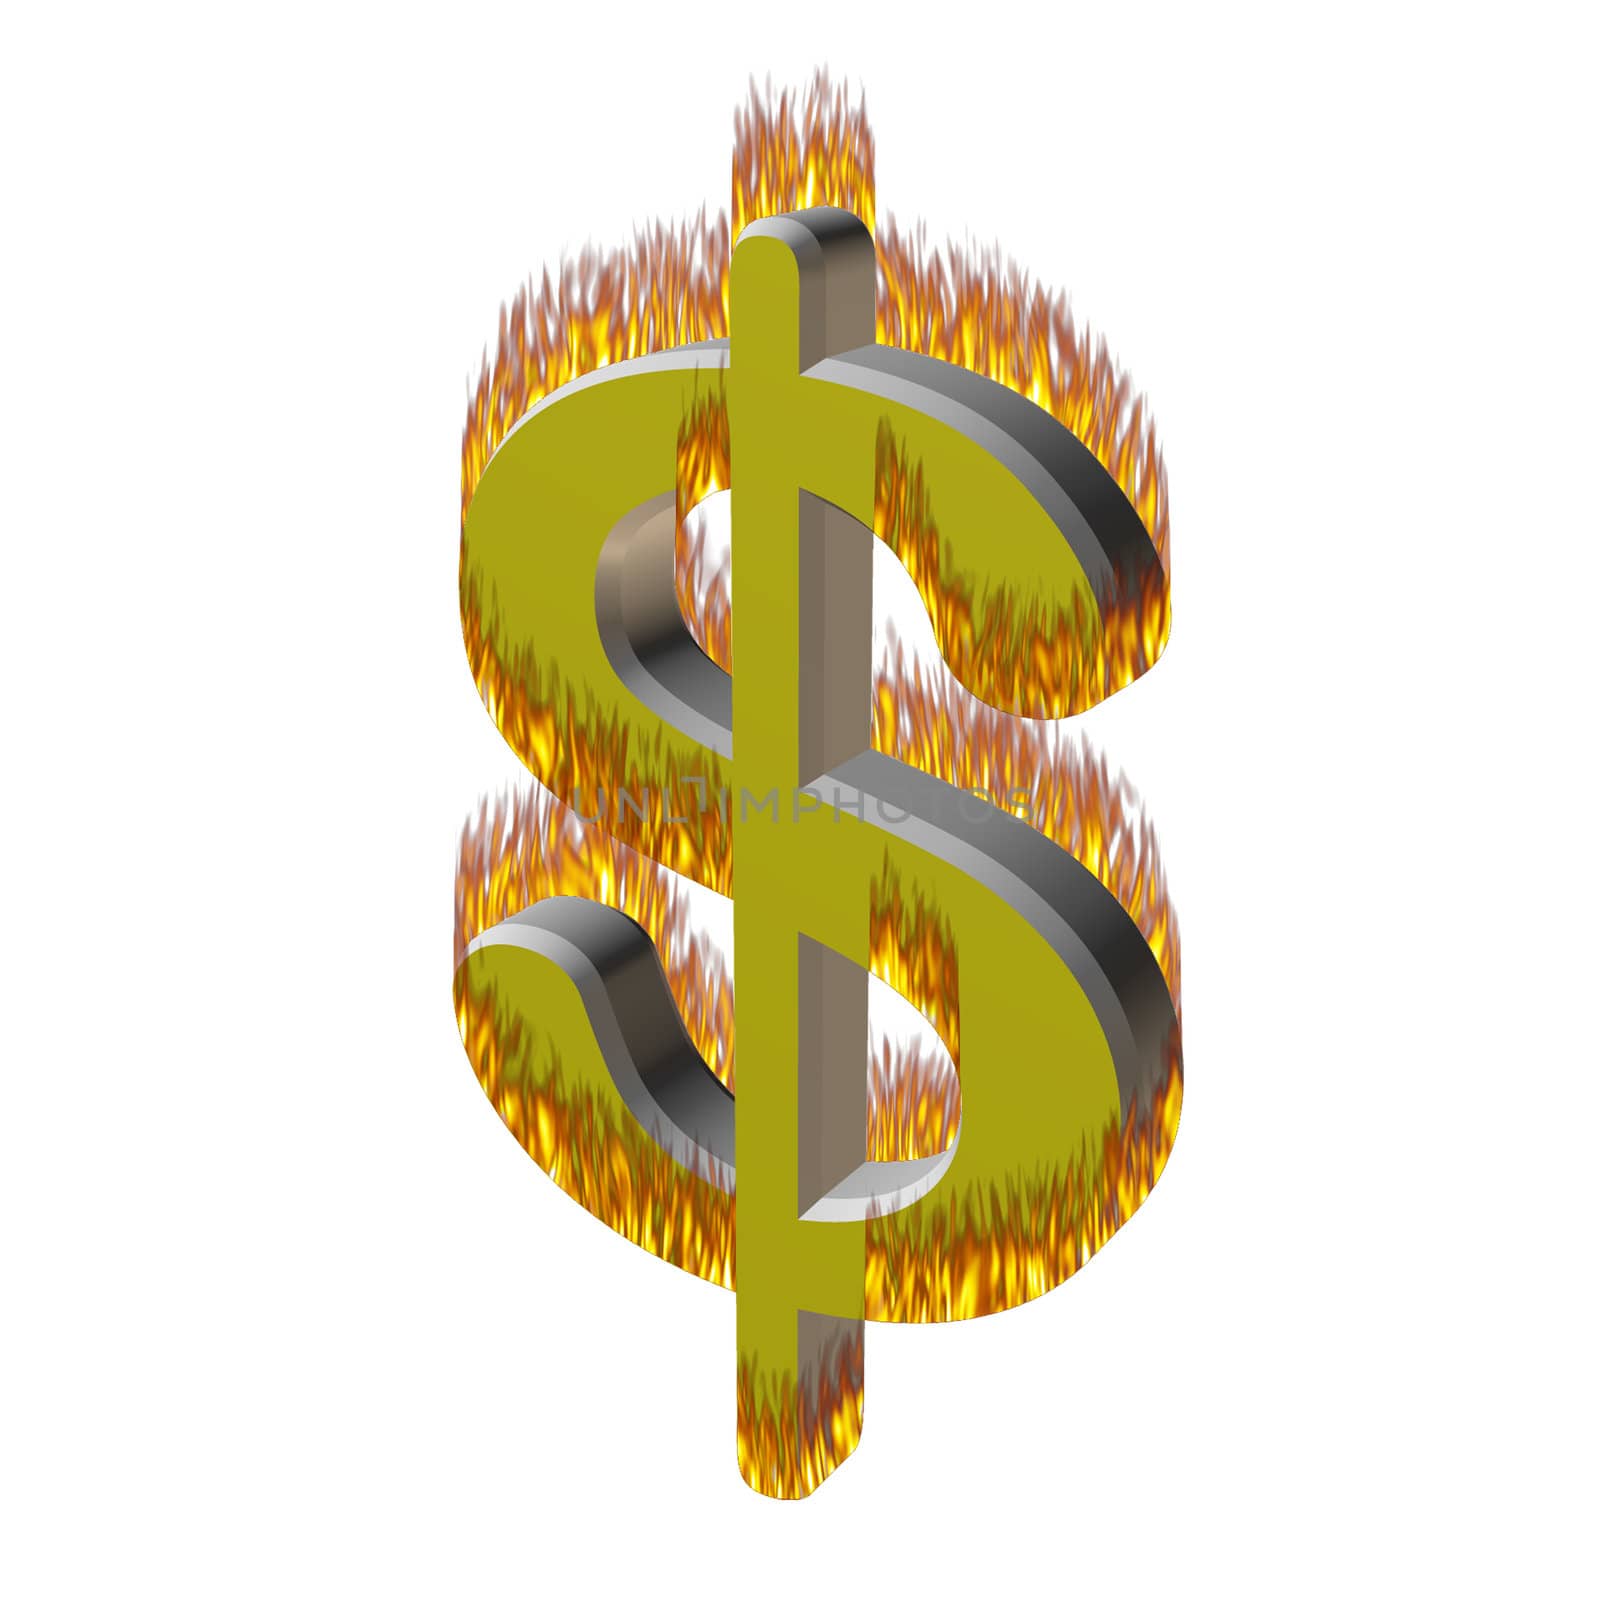 dollar symbol engulfed in flames of fire